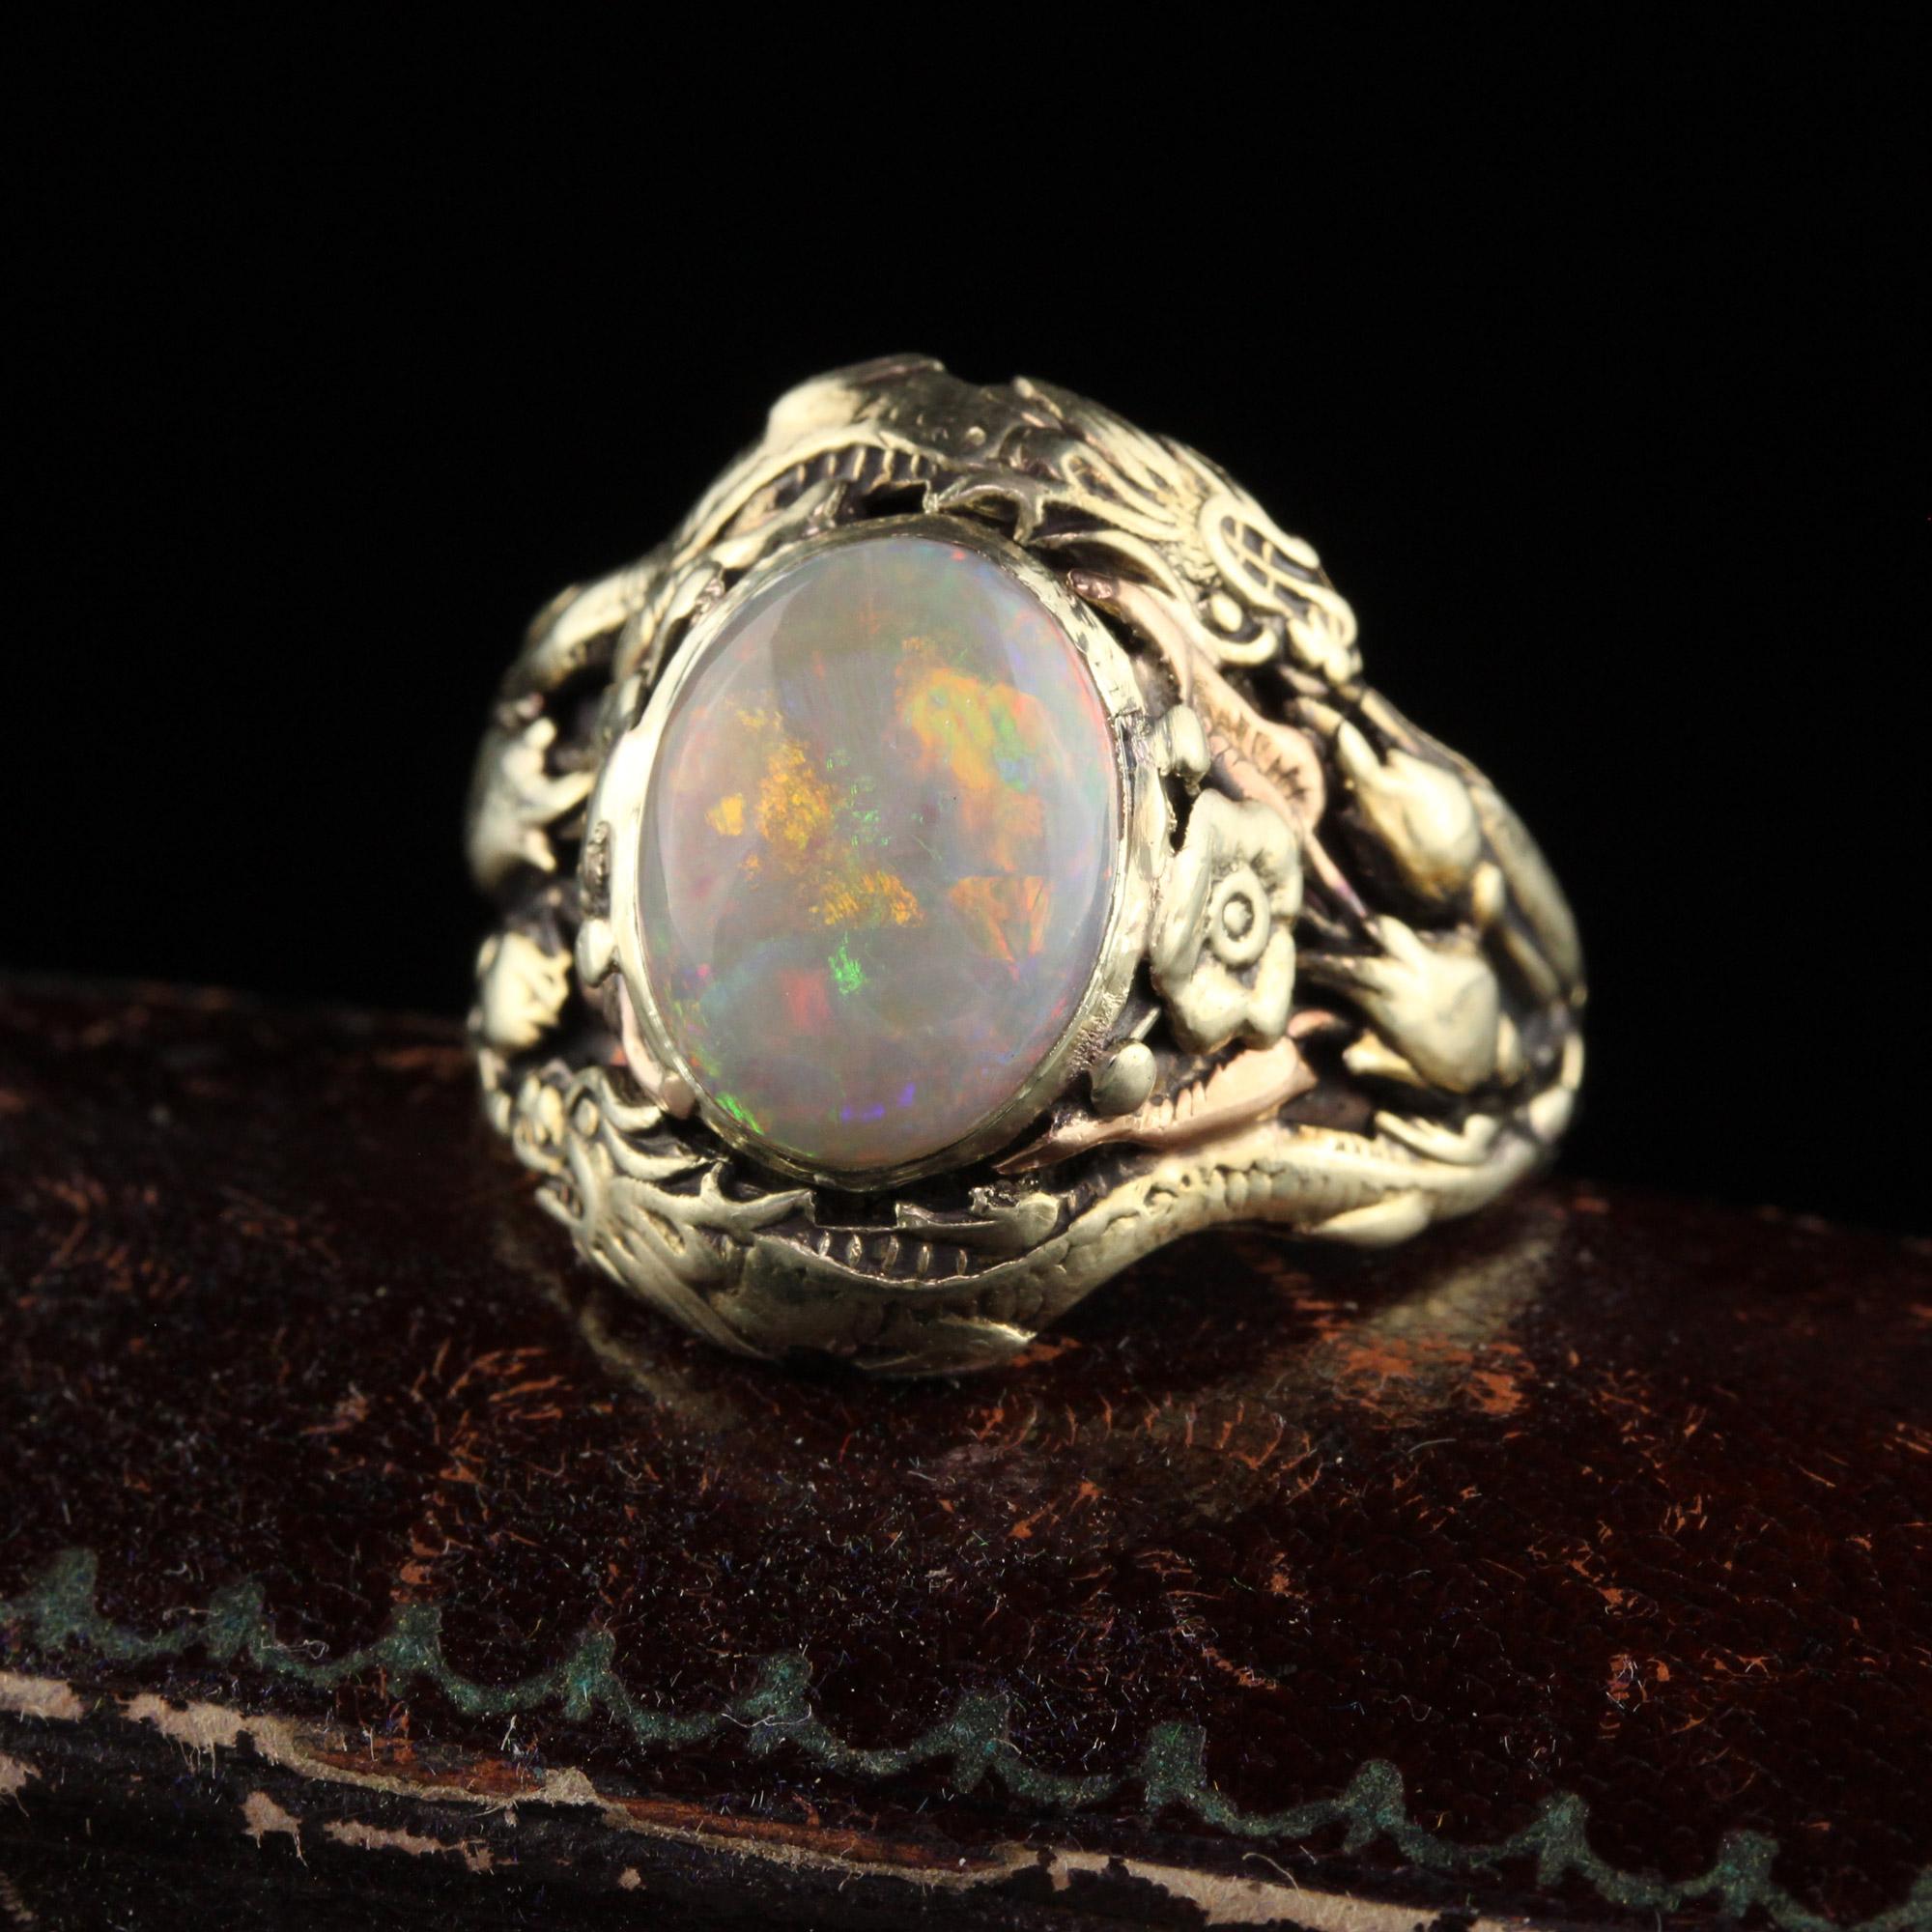 Beautiful Antique Art Nouveau 14K Yellow Gold Cabochon Opal Dragon Ring. This beautiful ring is crafted in 14k yellow gold. The center holds a vibrant cabochon opal with splashes of red, green,blue and purple that clearly and vibrantly pop. The ring